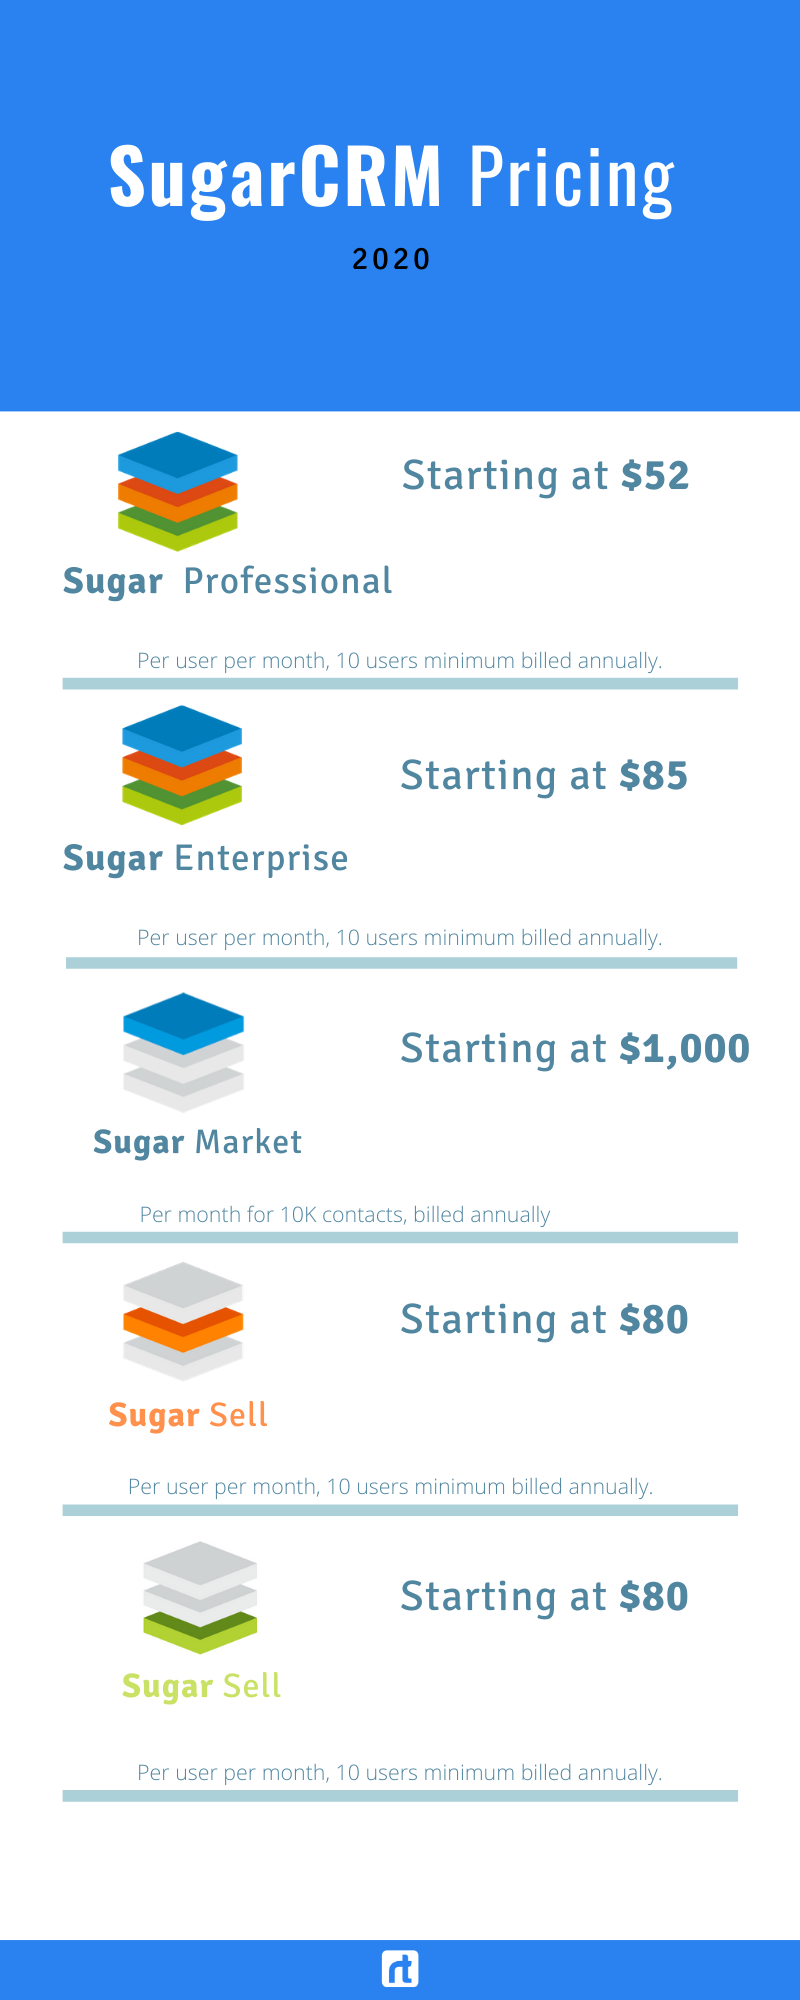 sugarcrm plans and pricing 2020